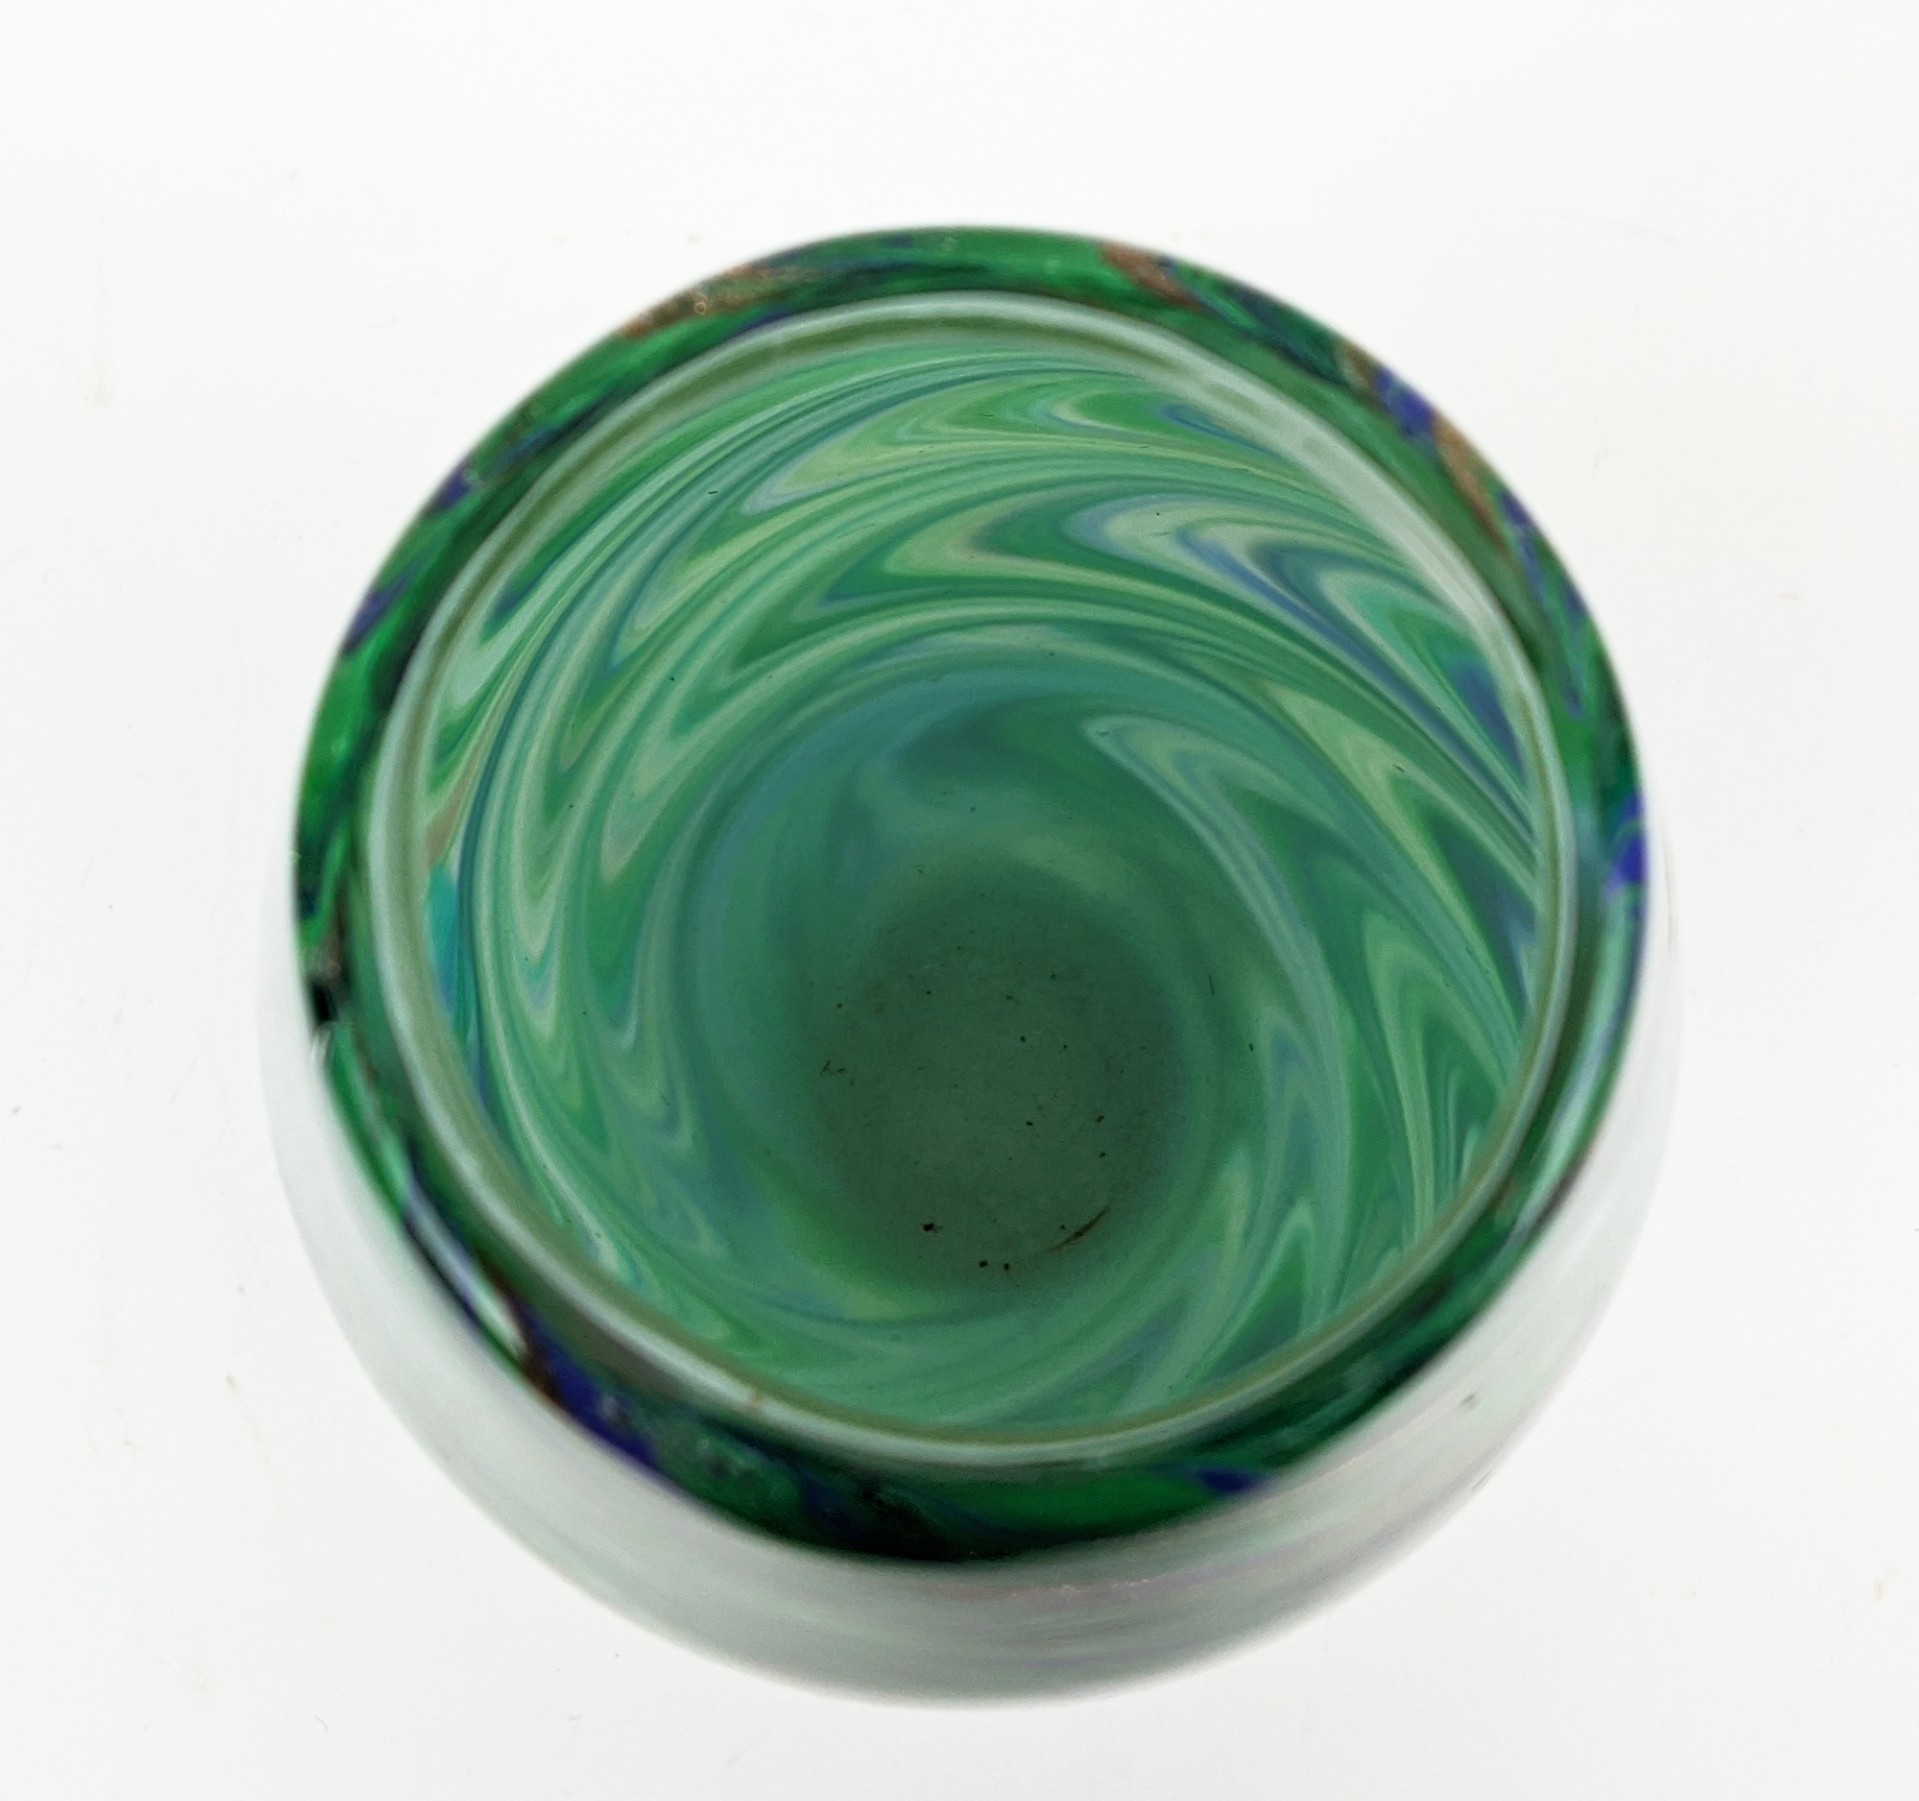 A MURANO GLASS VASE, of ovoid form, with a green, white and blue swirling pattern, gold flecks, 40cm - Image 4 of 7